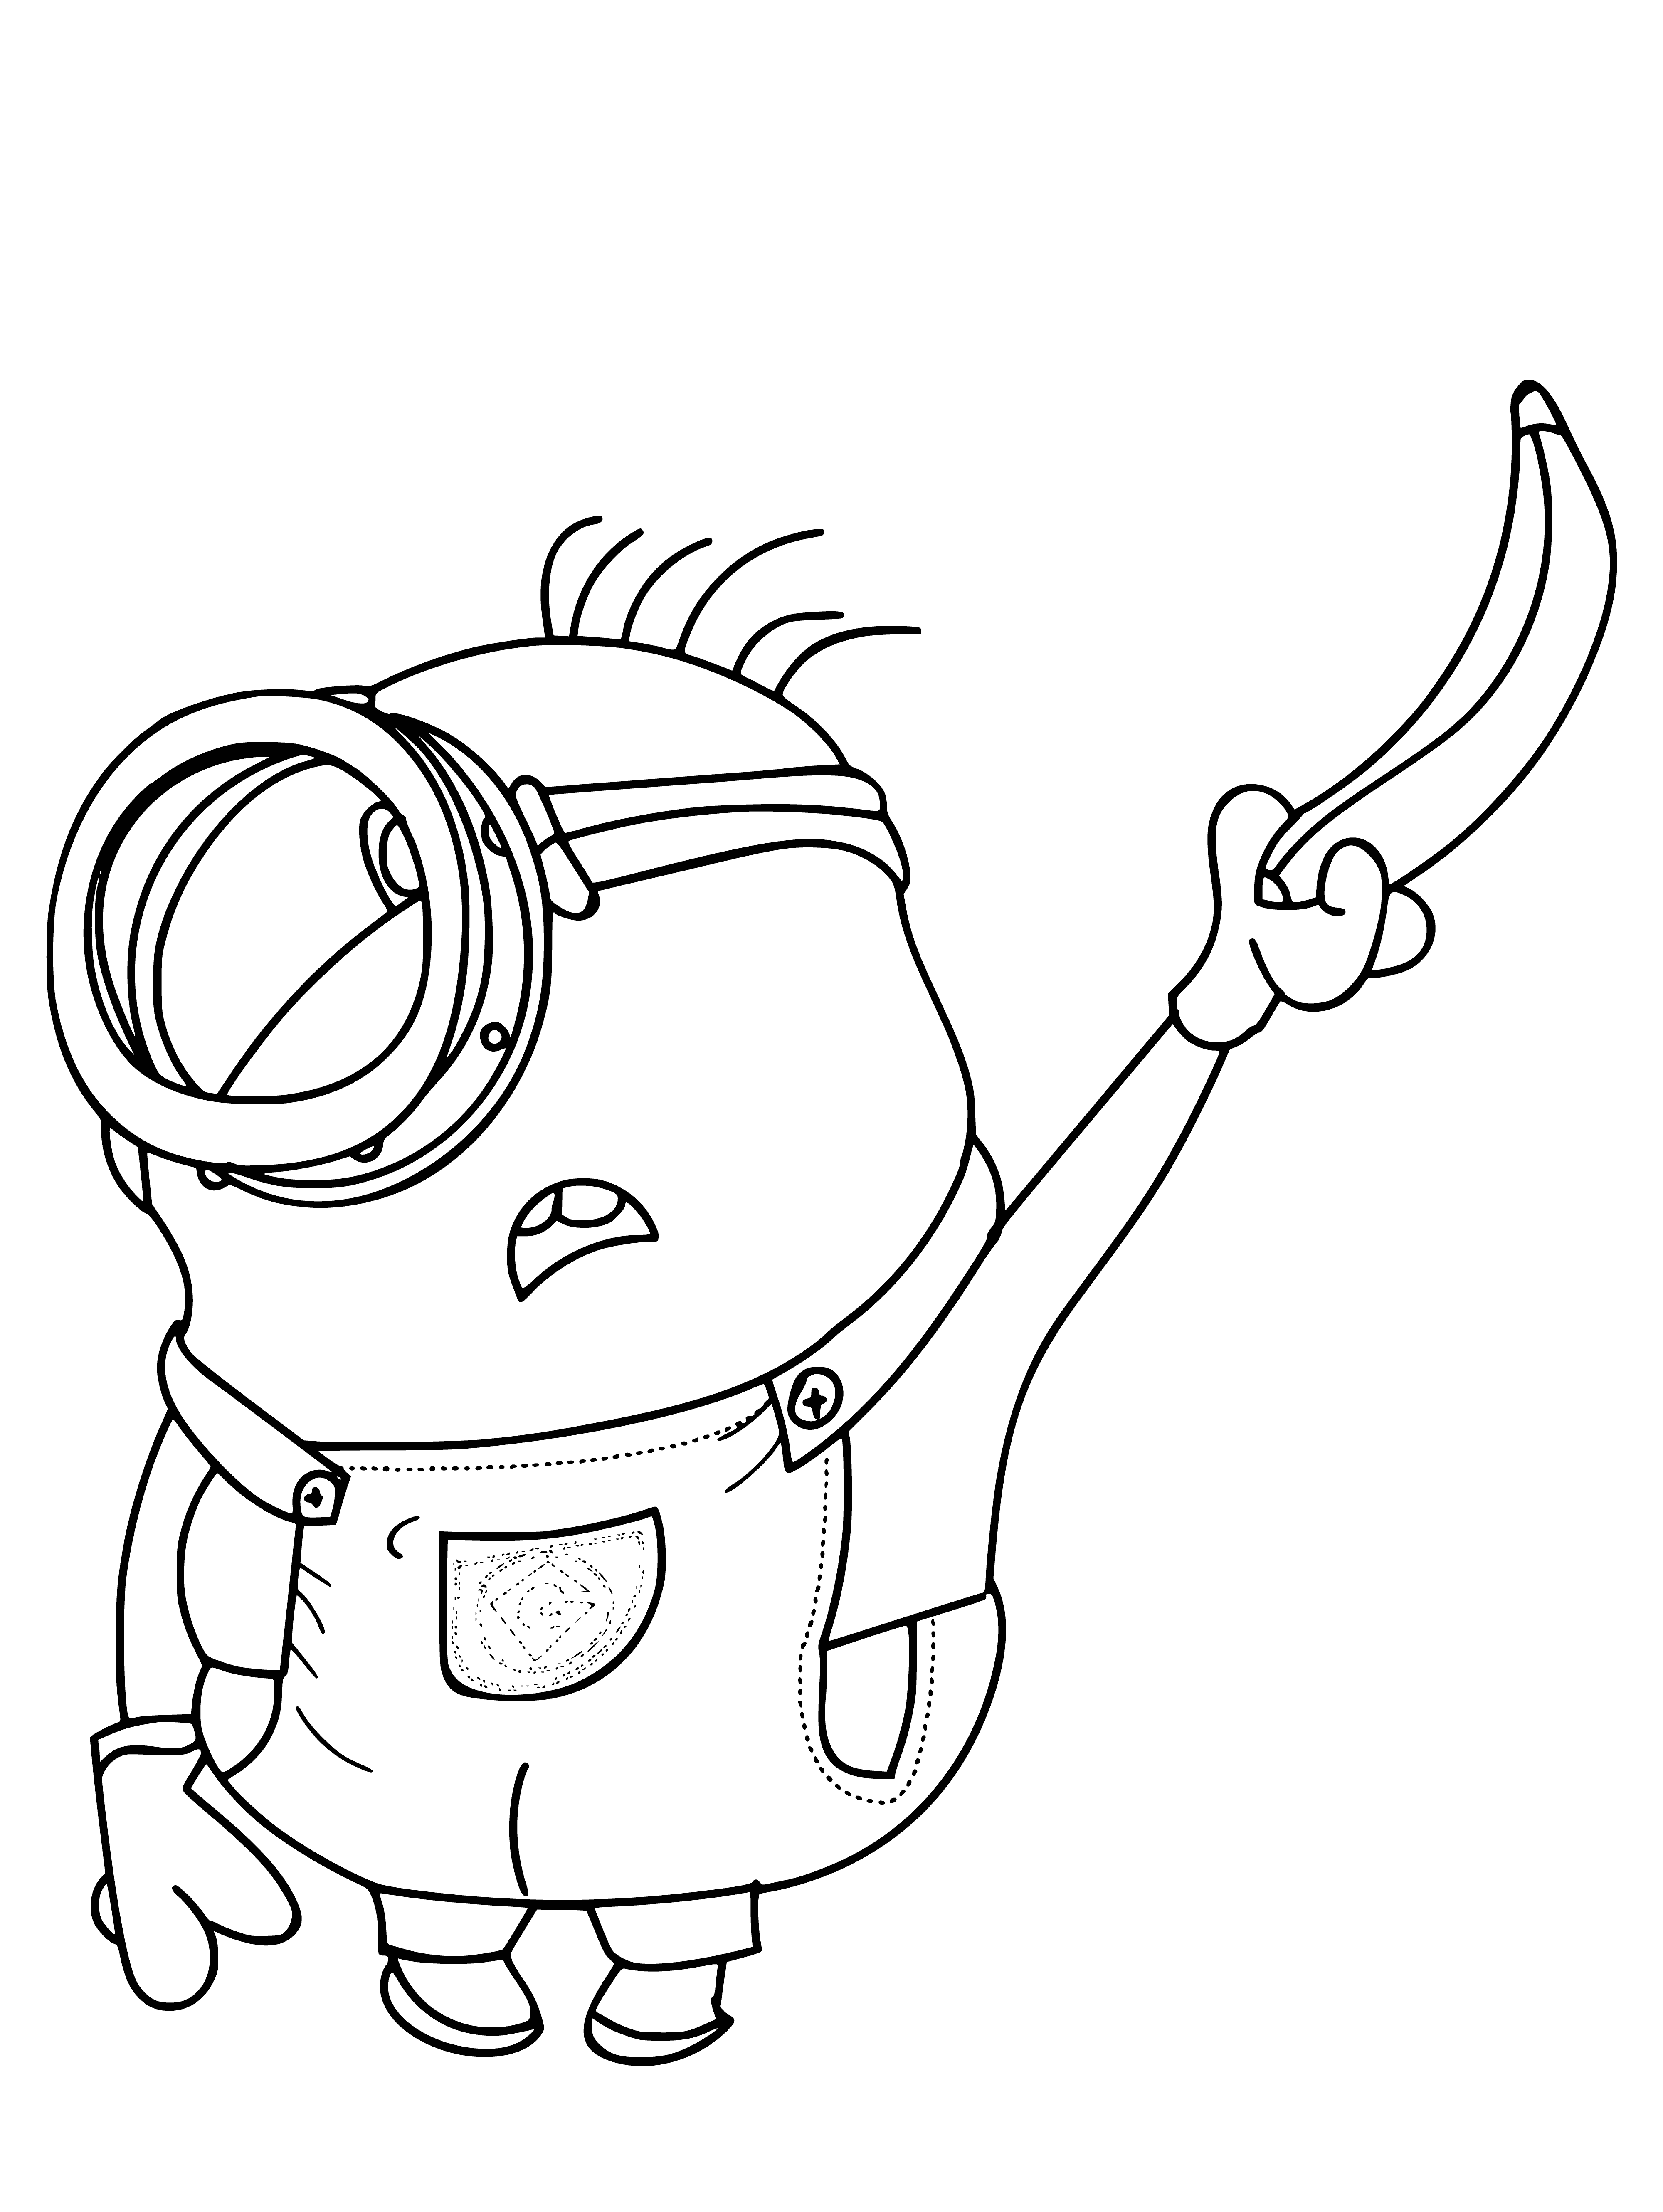 Mignon with banana coloring page